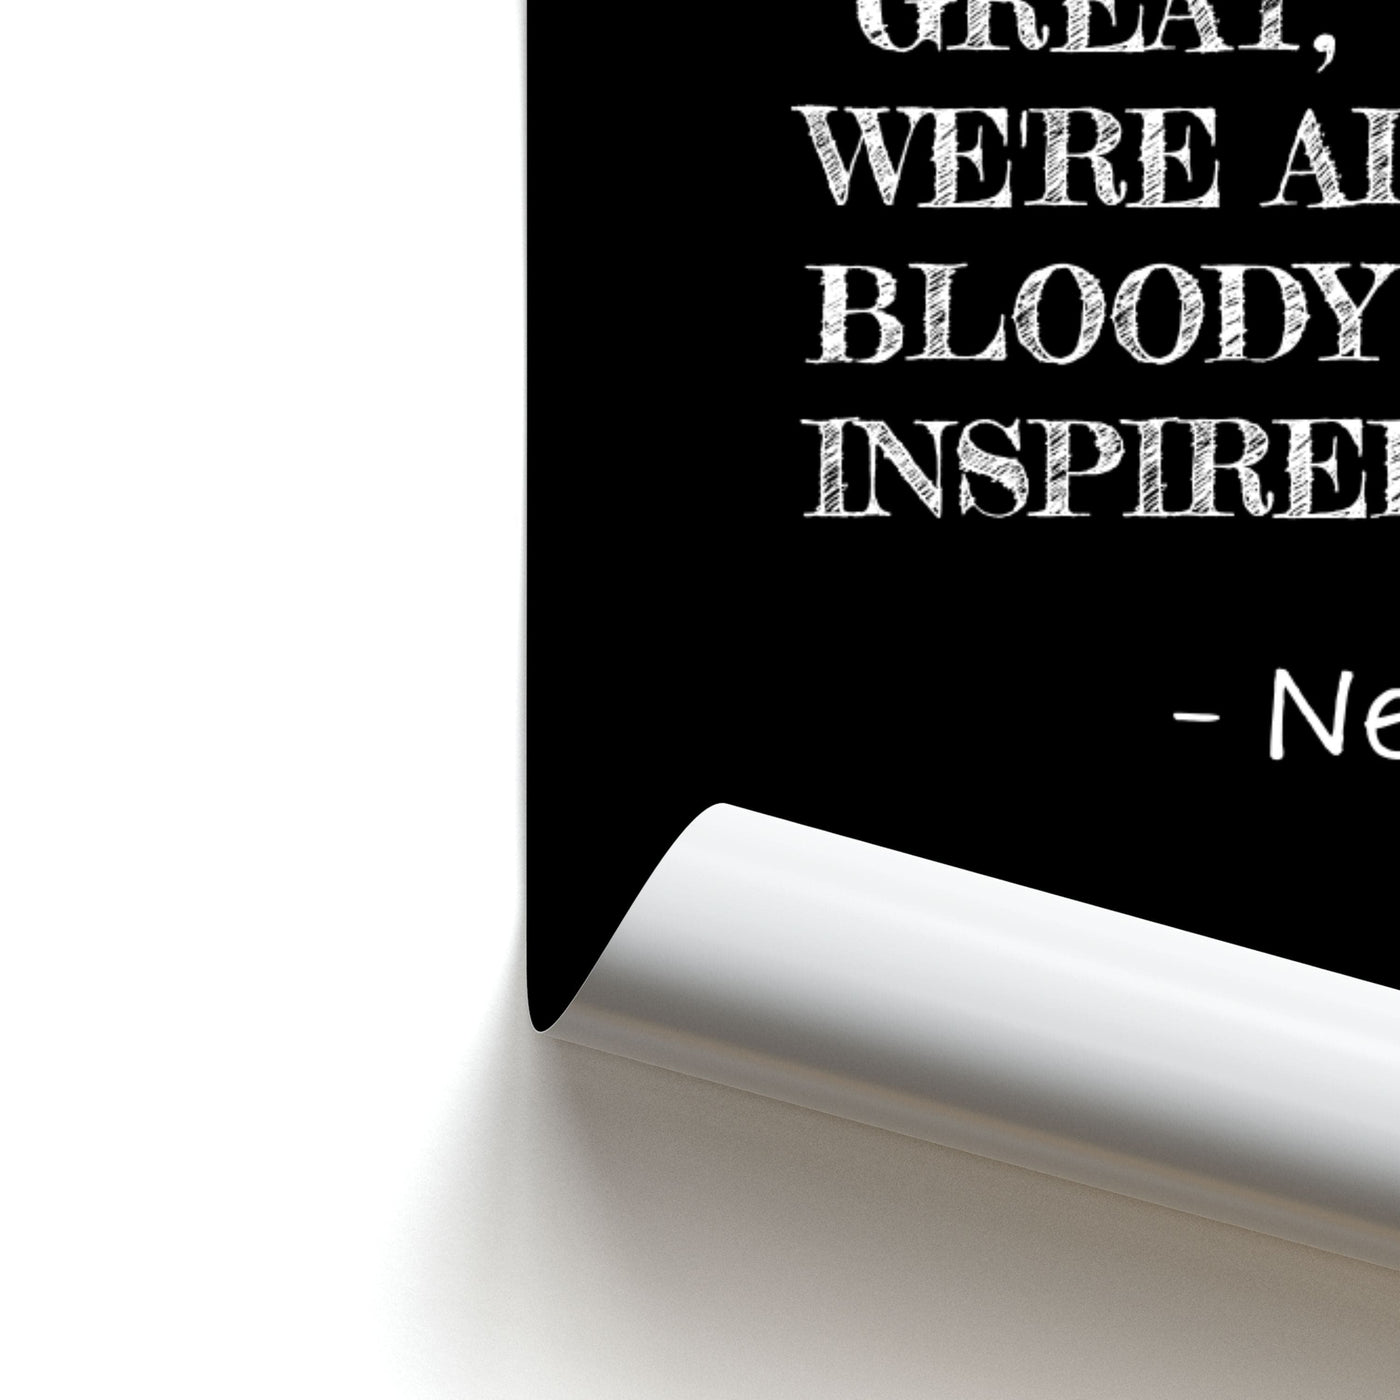 Great, We're All Bloody Inspired - Newt Poster